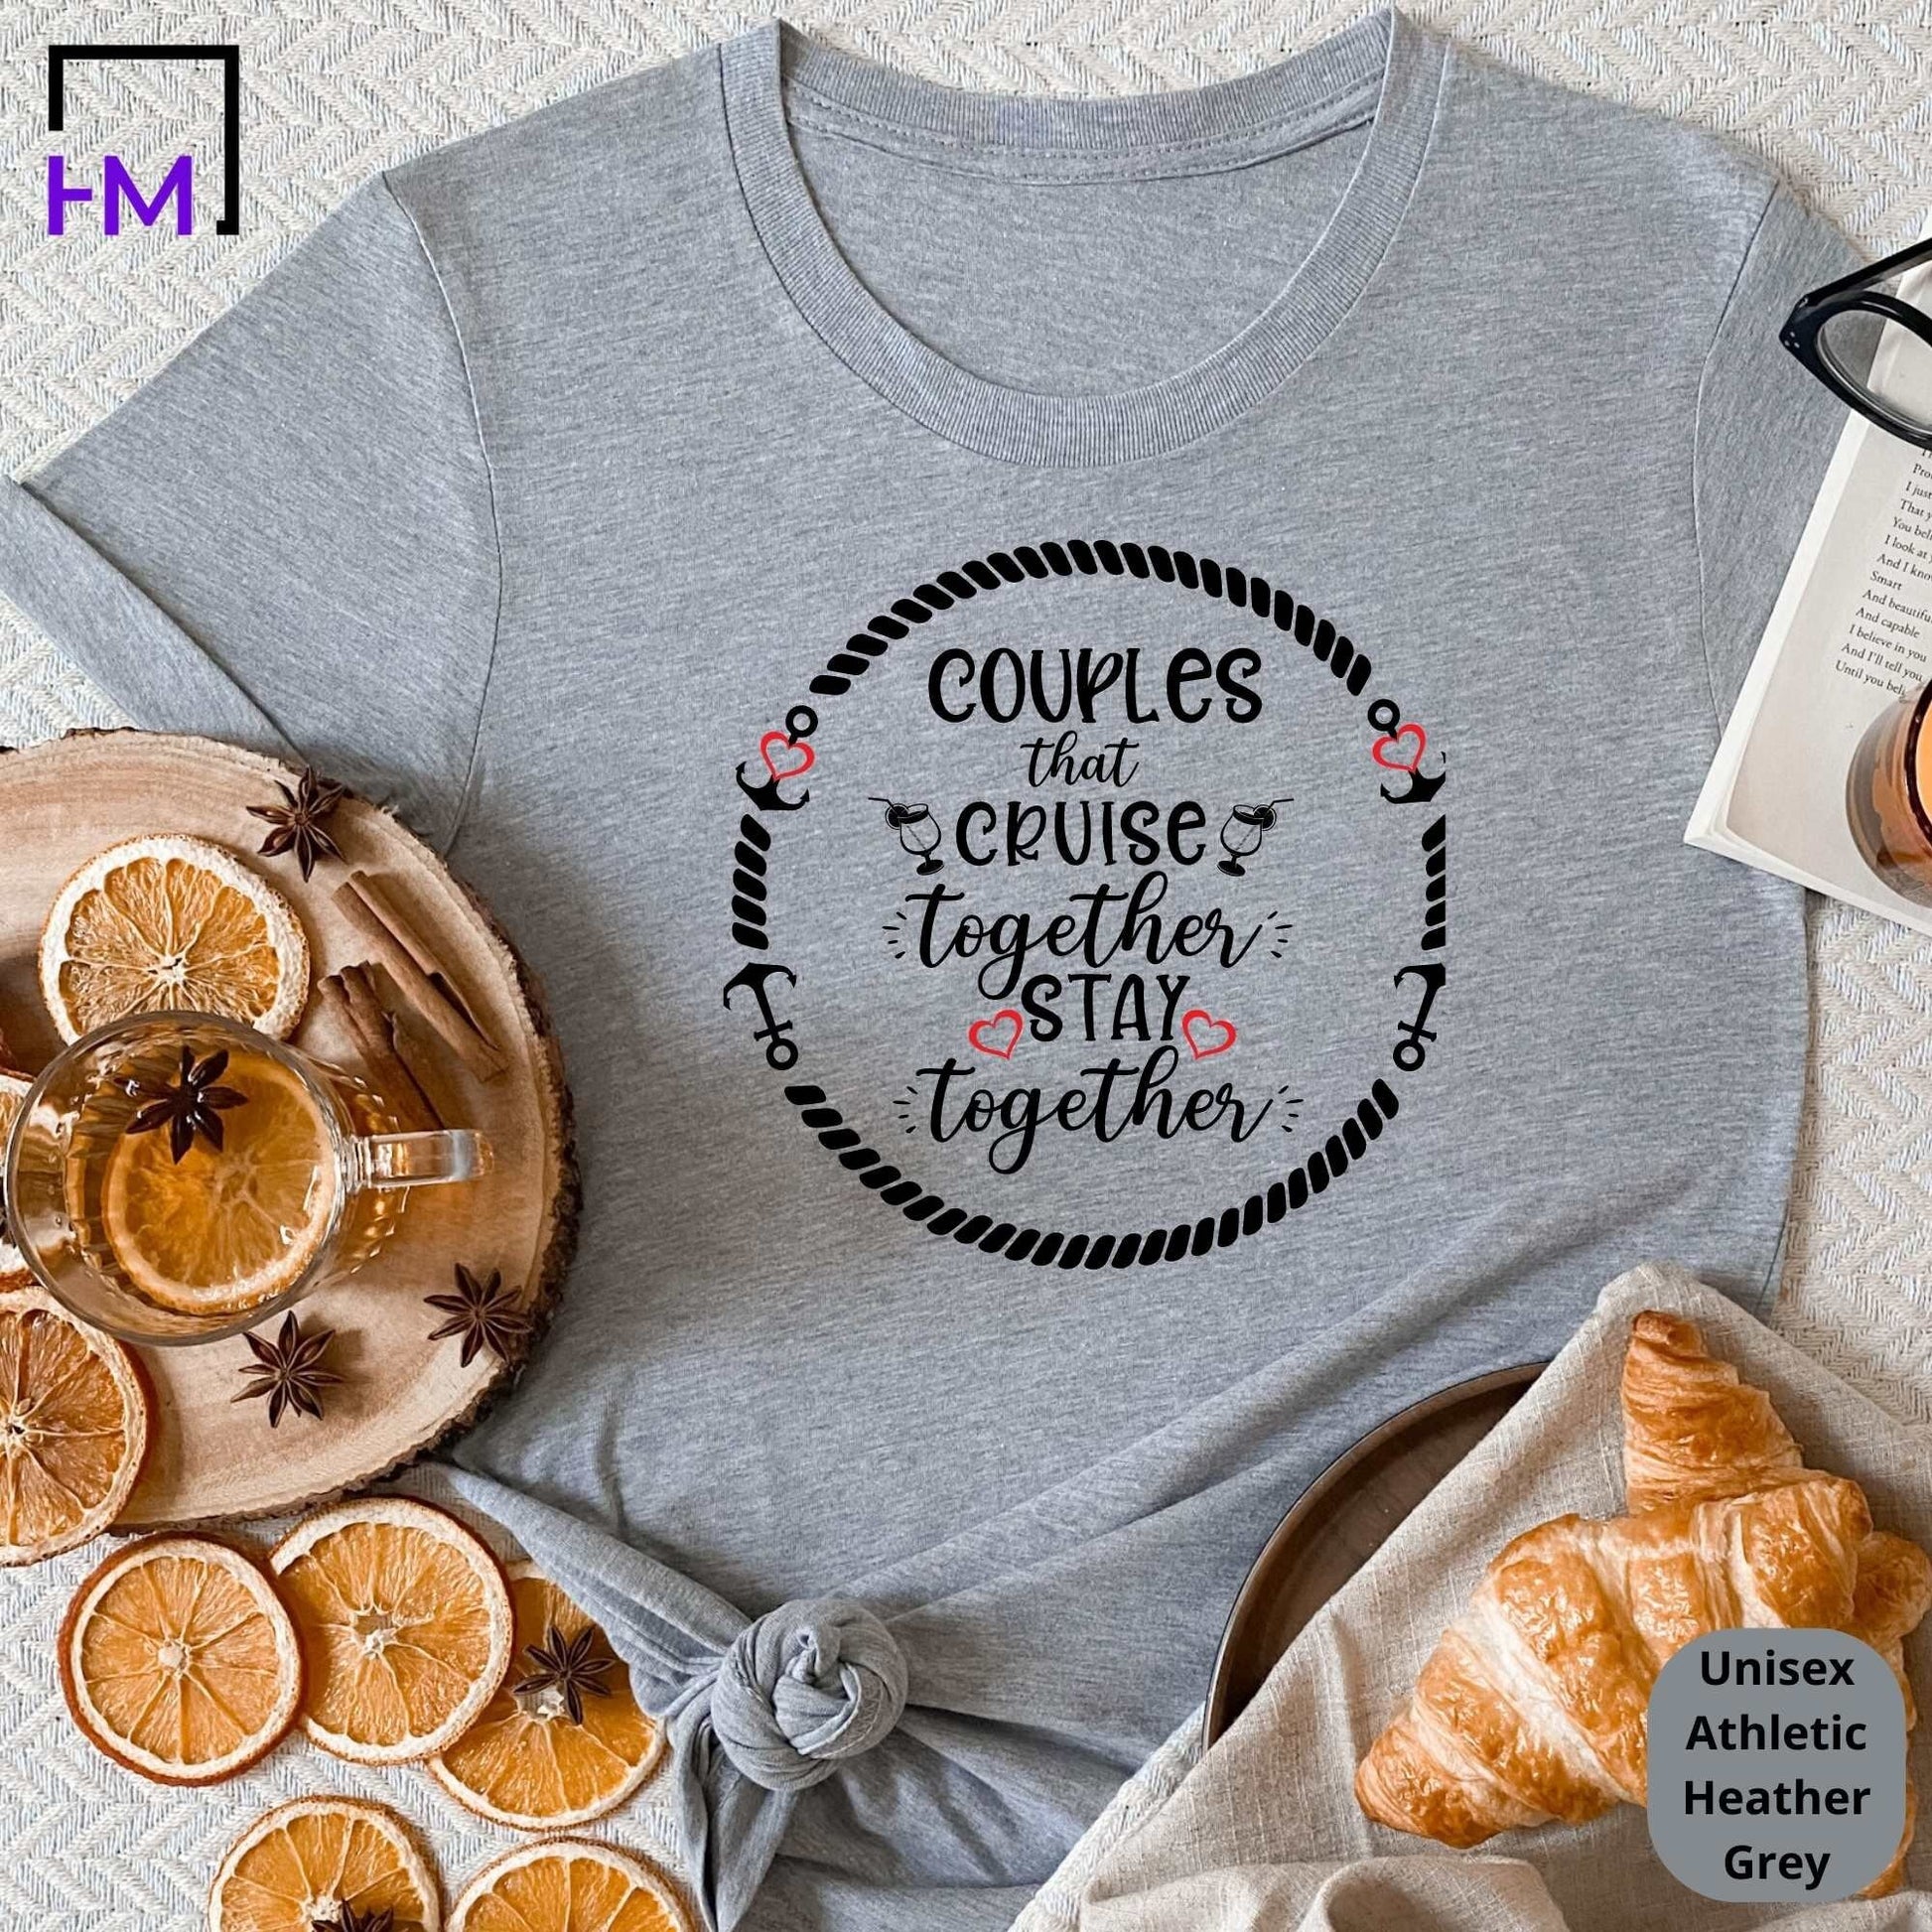 Couples Cruise Shirts for Family Vacations, Birthday Cruise Trips, Honeymoon Cruise Shirts, Christmas Cruise Shirts, New Years Cruise Gifts-Ref#CR21 HMDesignStudioUS